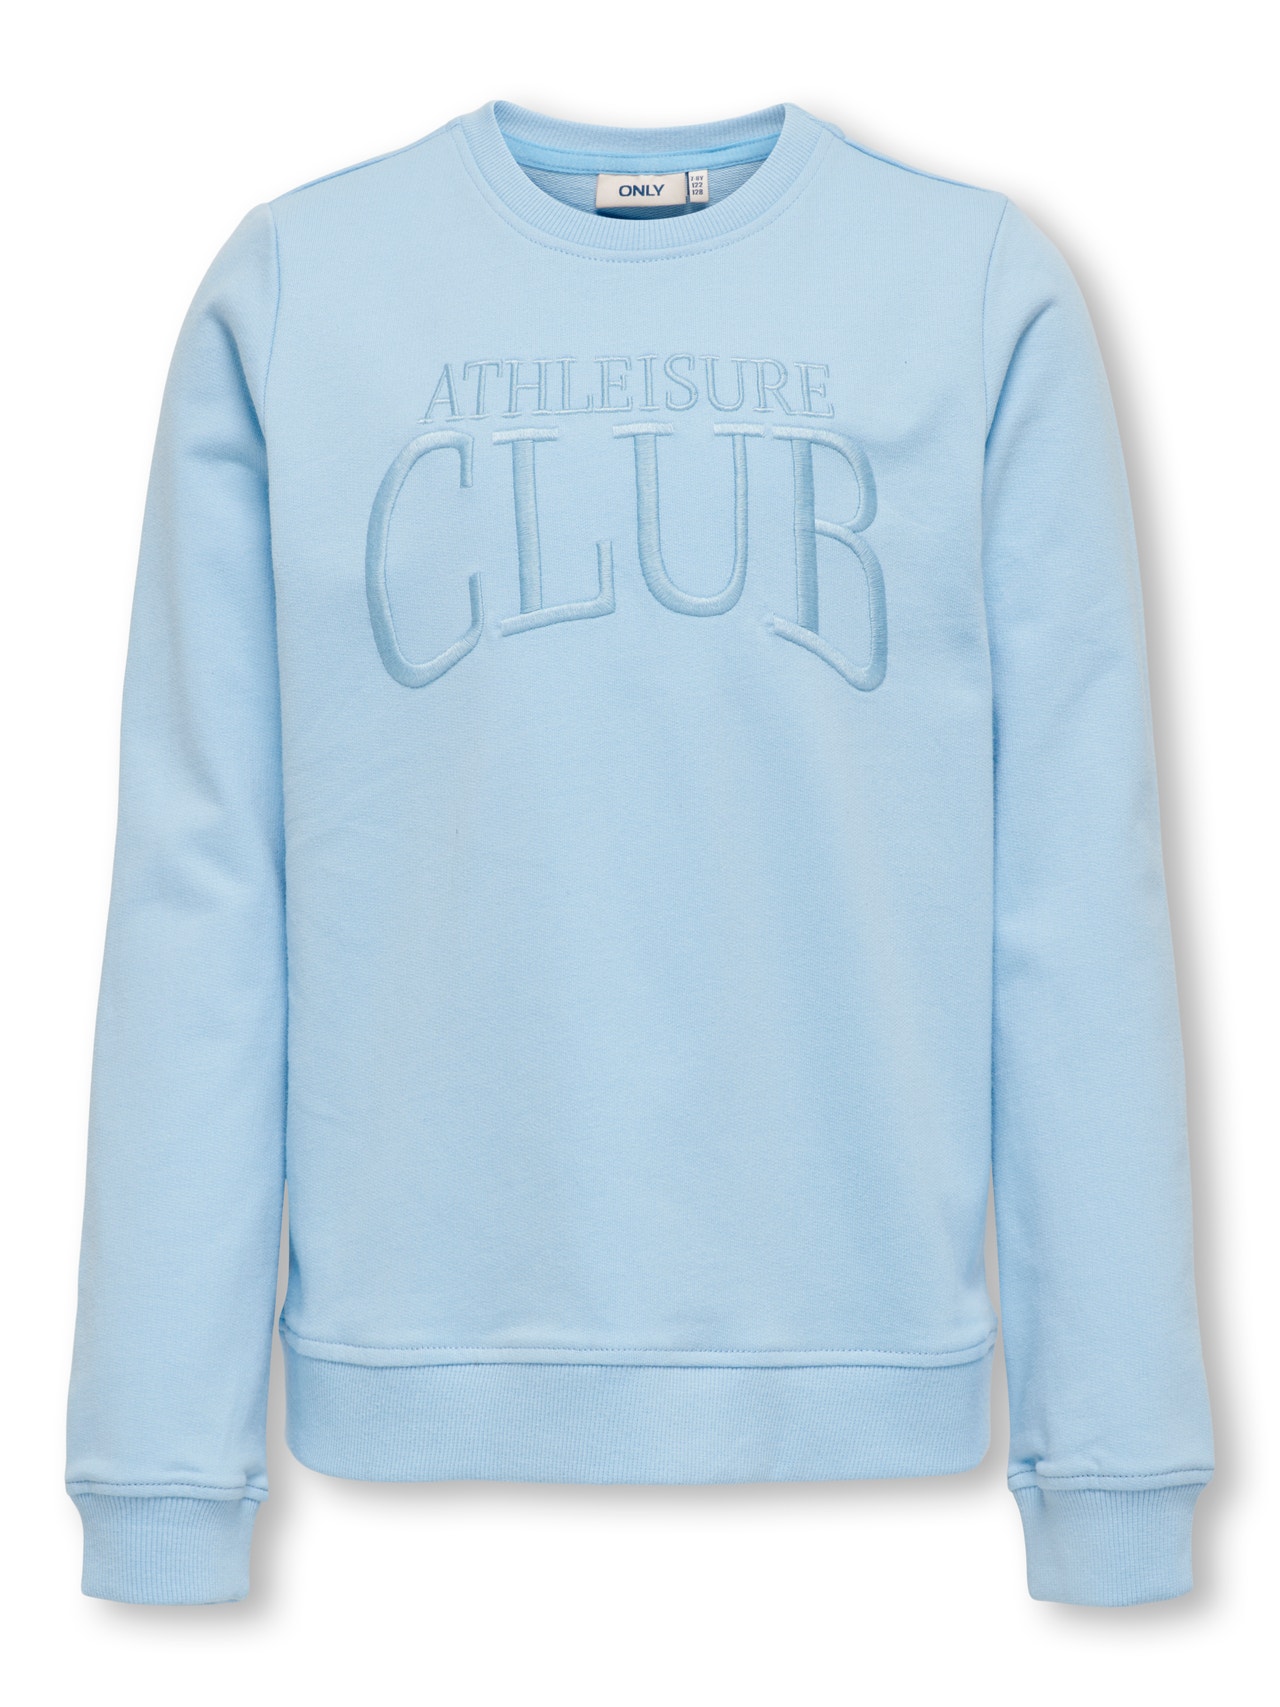 ONLY Regular Fit Round Neck Ribbed cuffs Sweatshirt -Clear Sky - 15322546